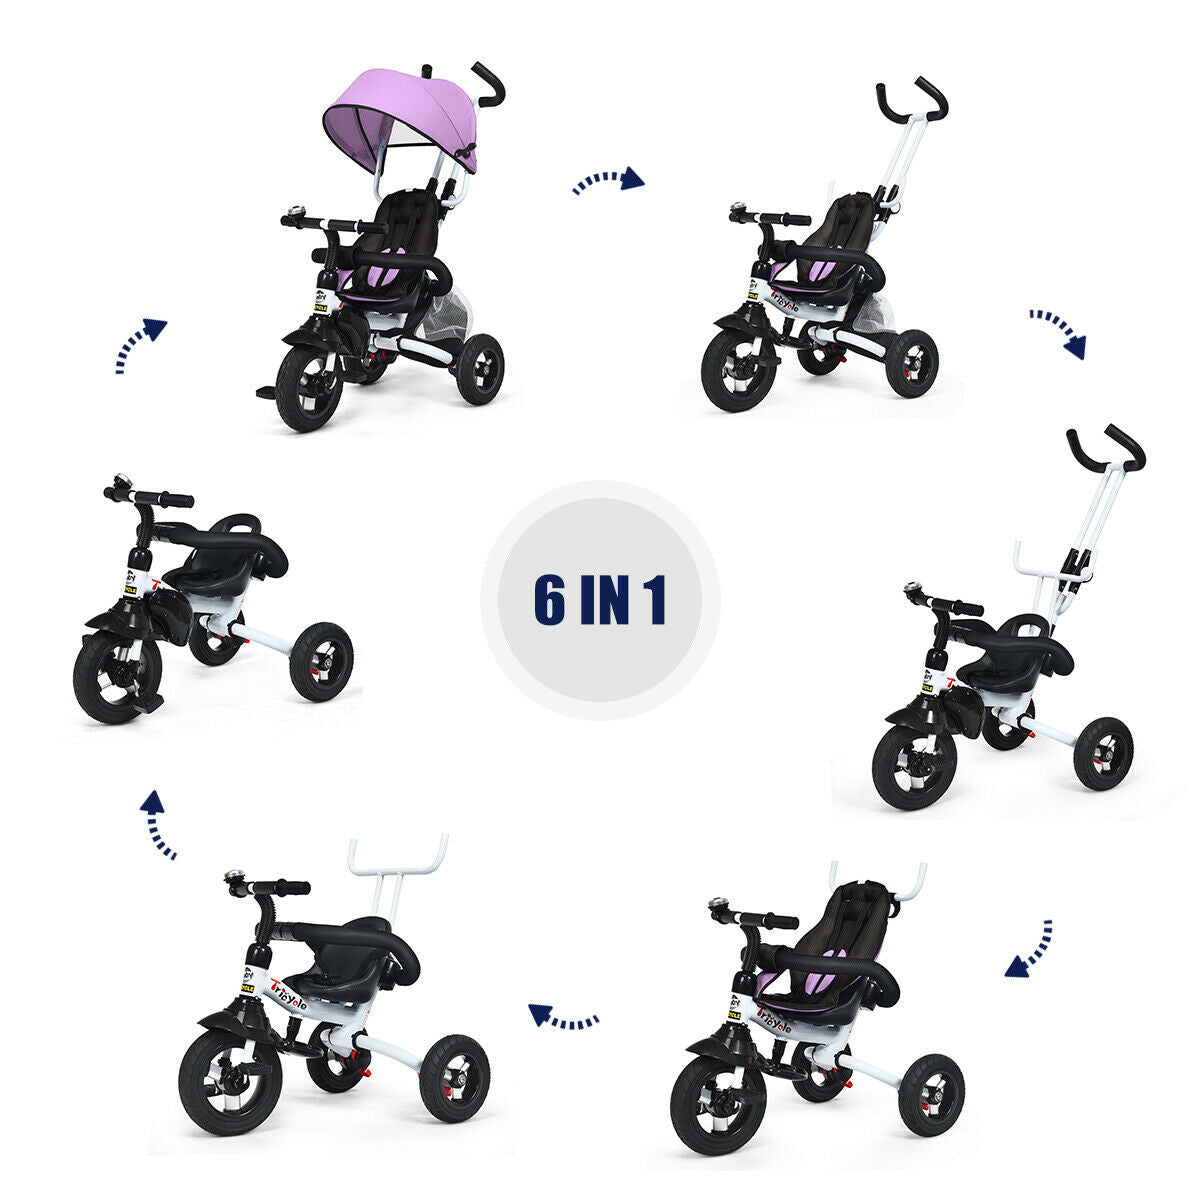 6-In-1 Kids Baby Stroller Tricycle Bike w/ Canopy Cover